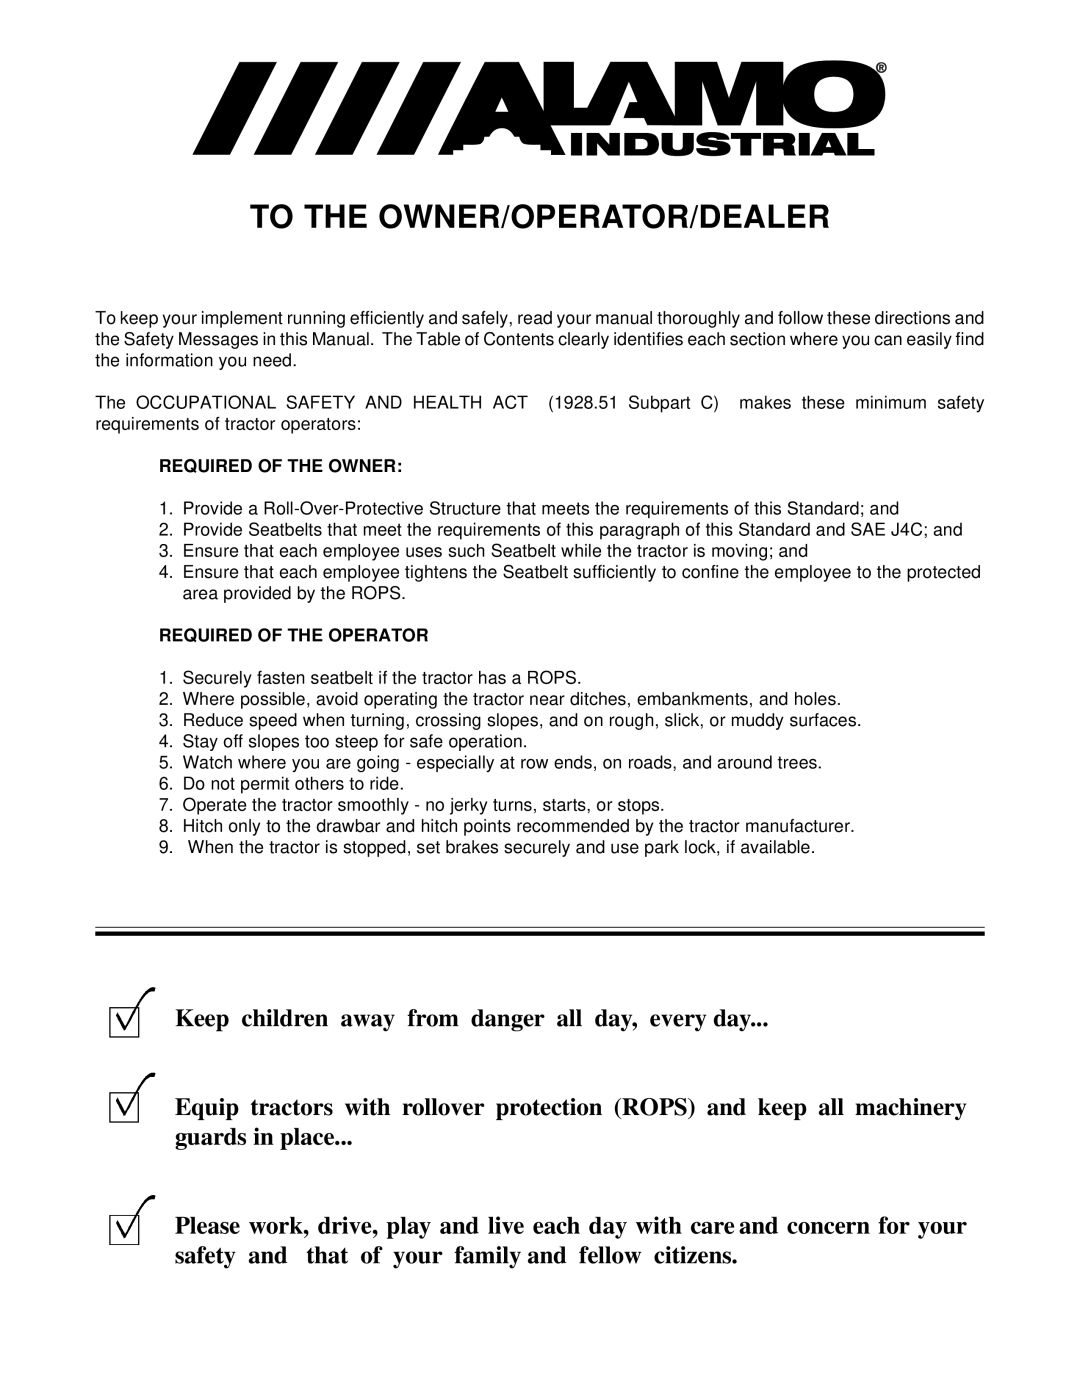 Alamo 02983326P manual To The Owner/Operator/Dealer, Keep children away from danger all day, every day, guards in place 